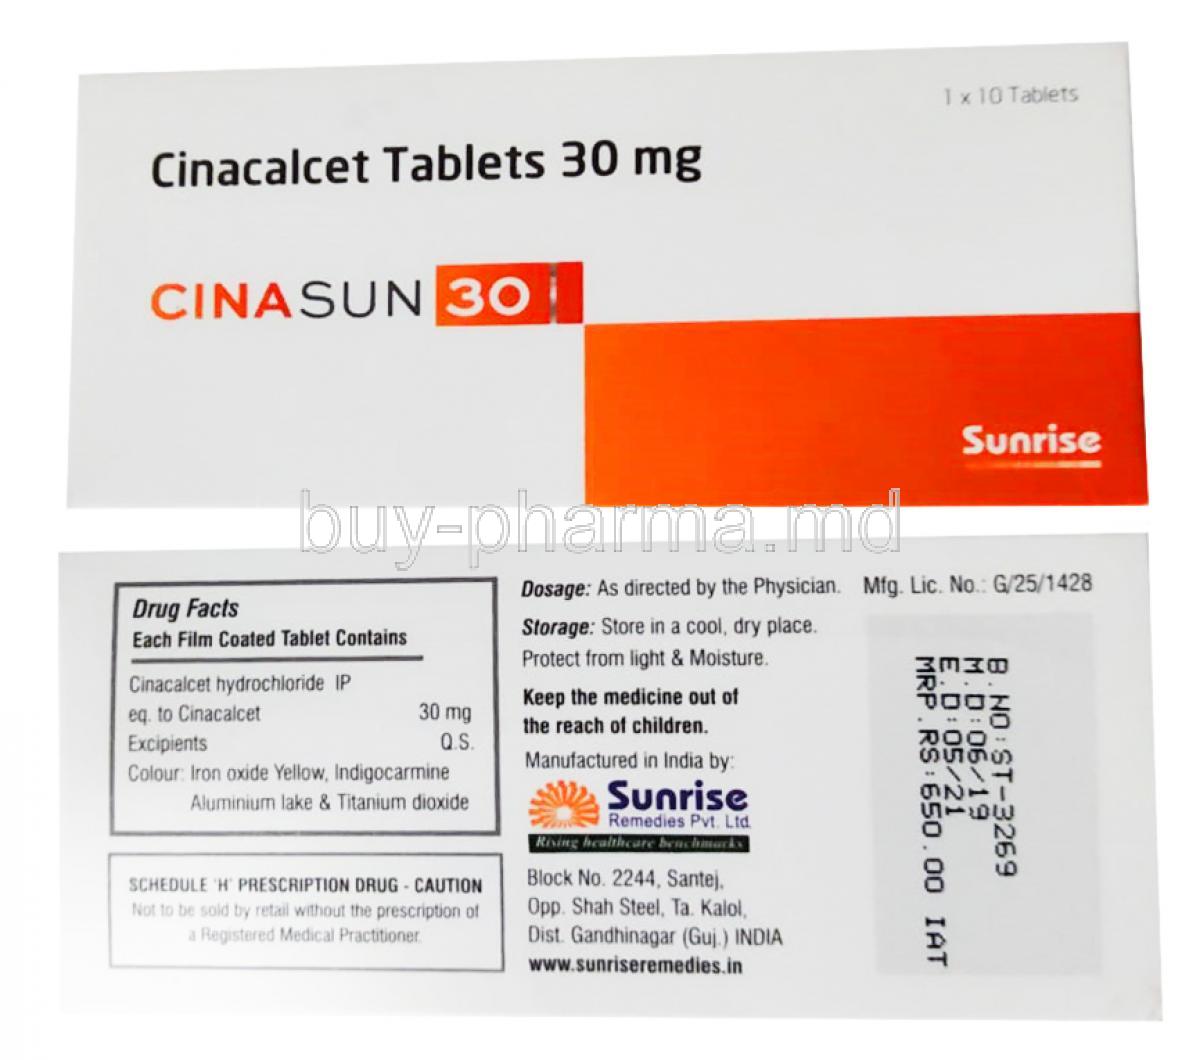 Cinacalcet Tablets 30 mg, CinaSun30, Sunrise, box front and back presentation